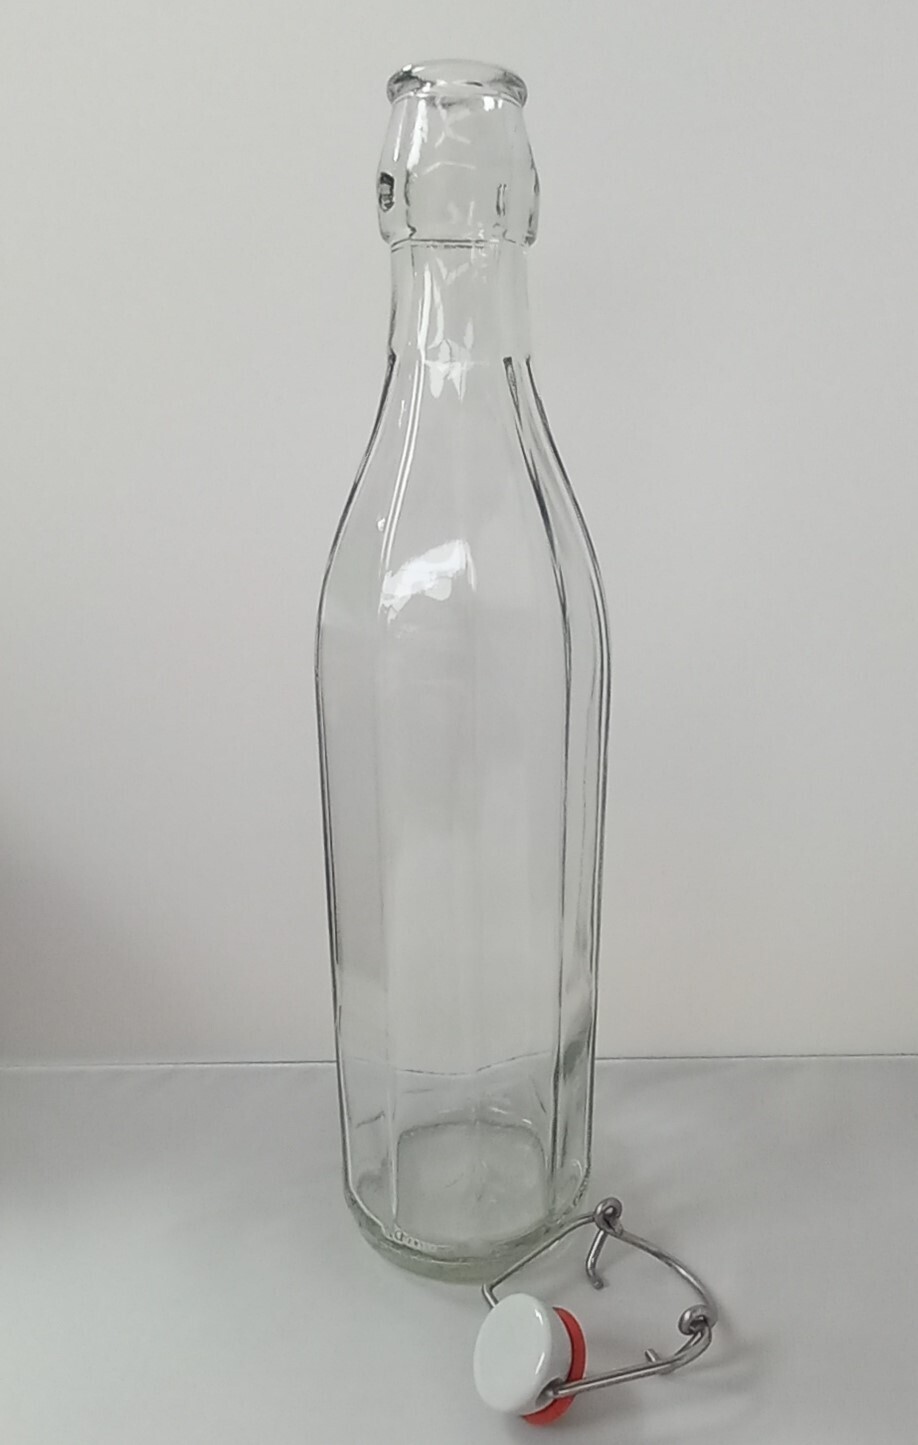 Swing Stopper Flip Top Glass Bottles - 500ml with ceramic stopper - Packs of 6, 14 and 28 units